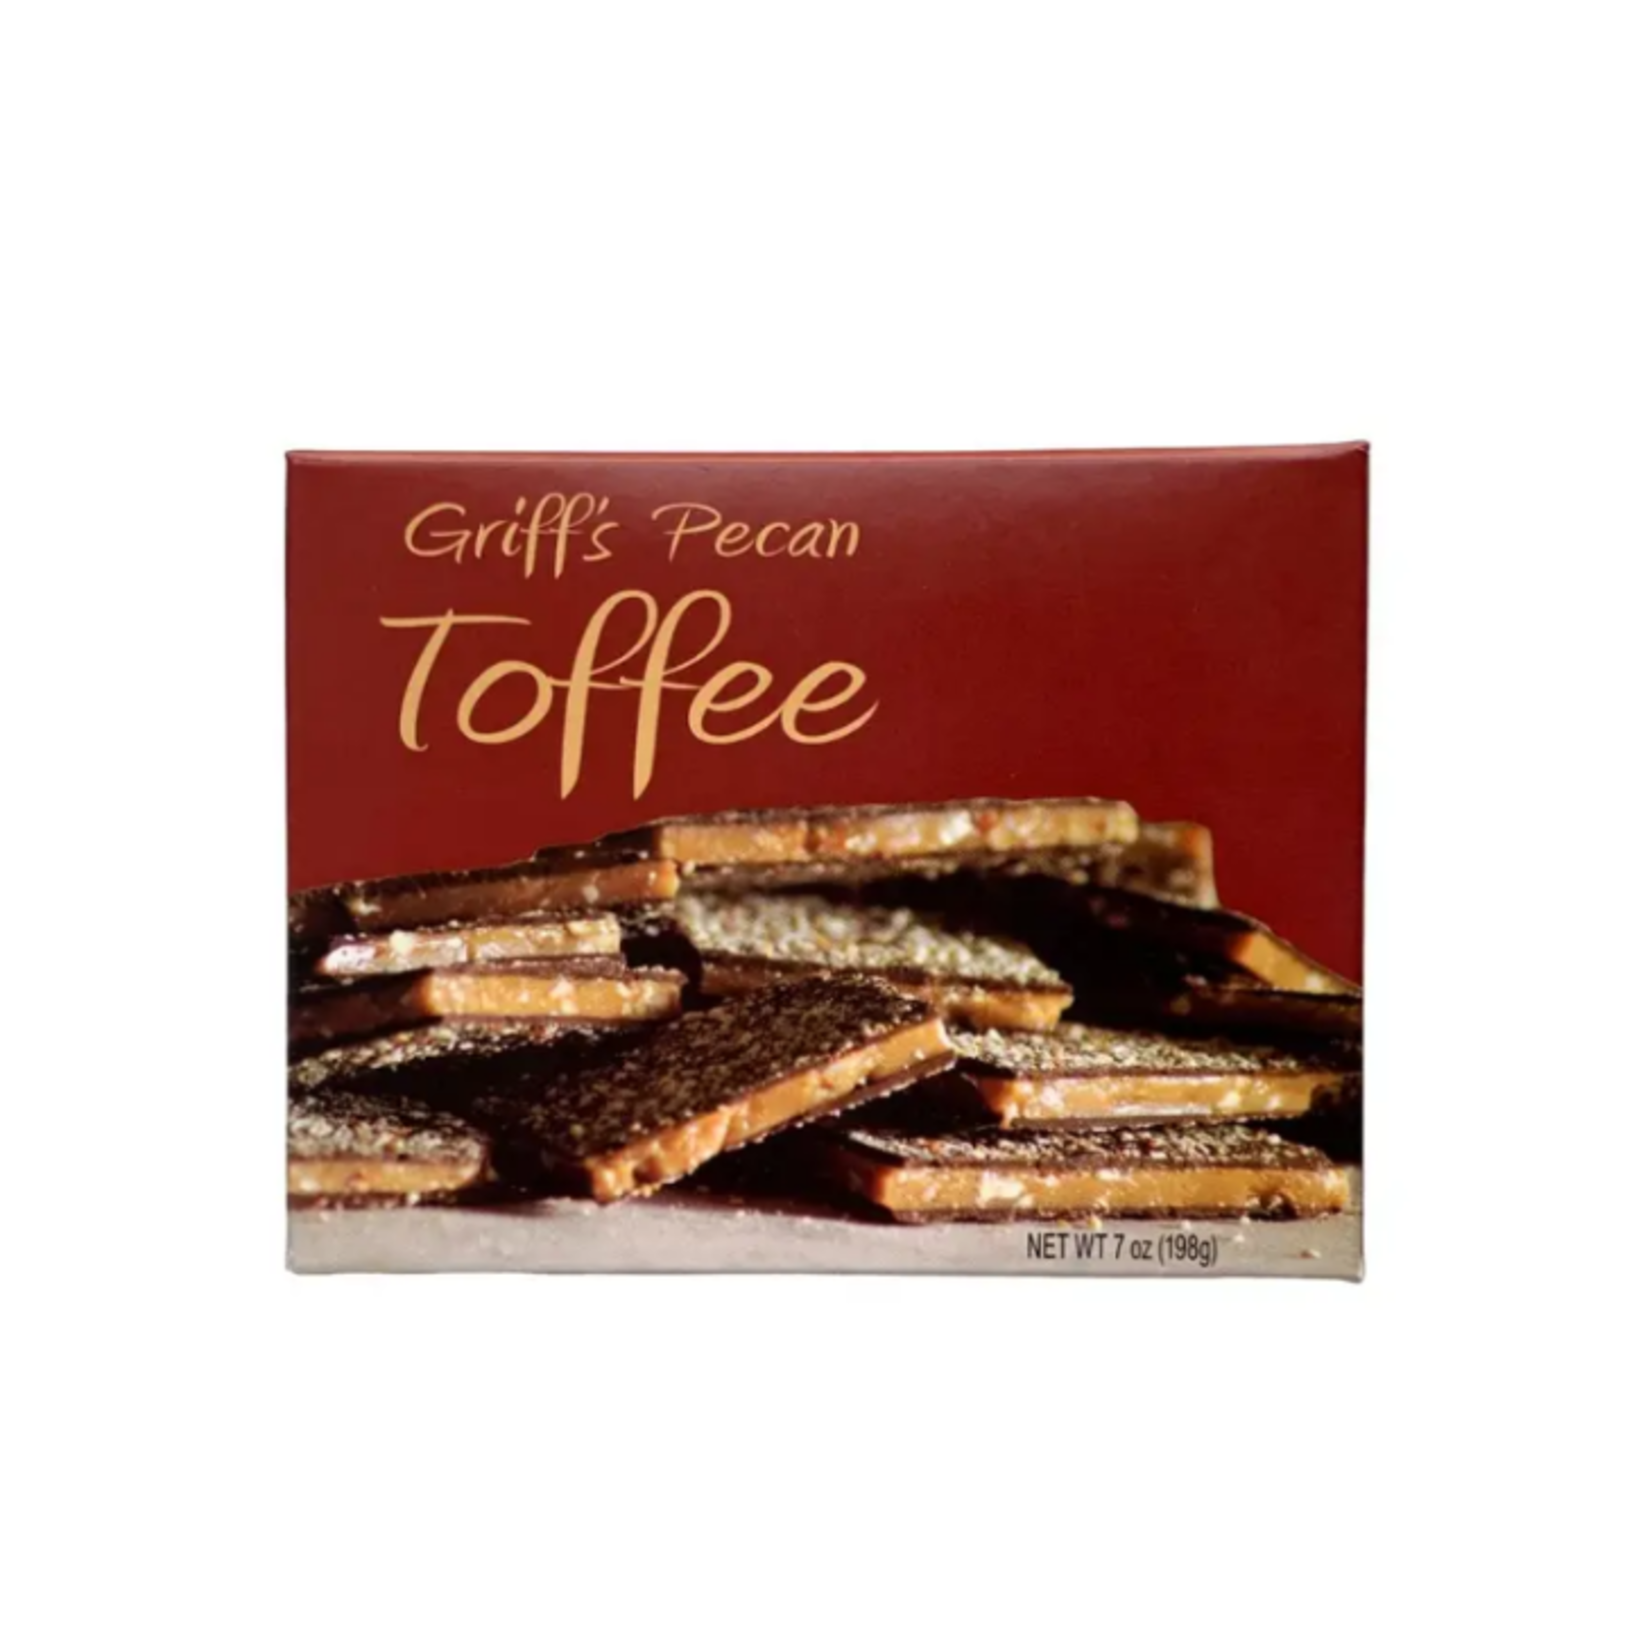 Griff's Toffee Griff's Pecan Toffee 7 oz